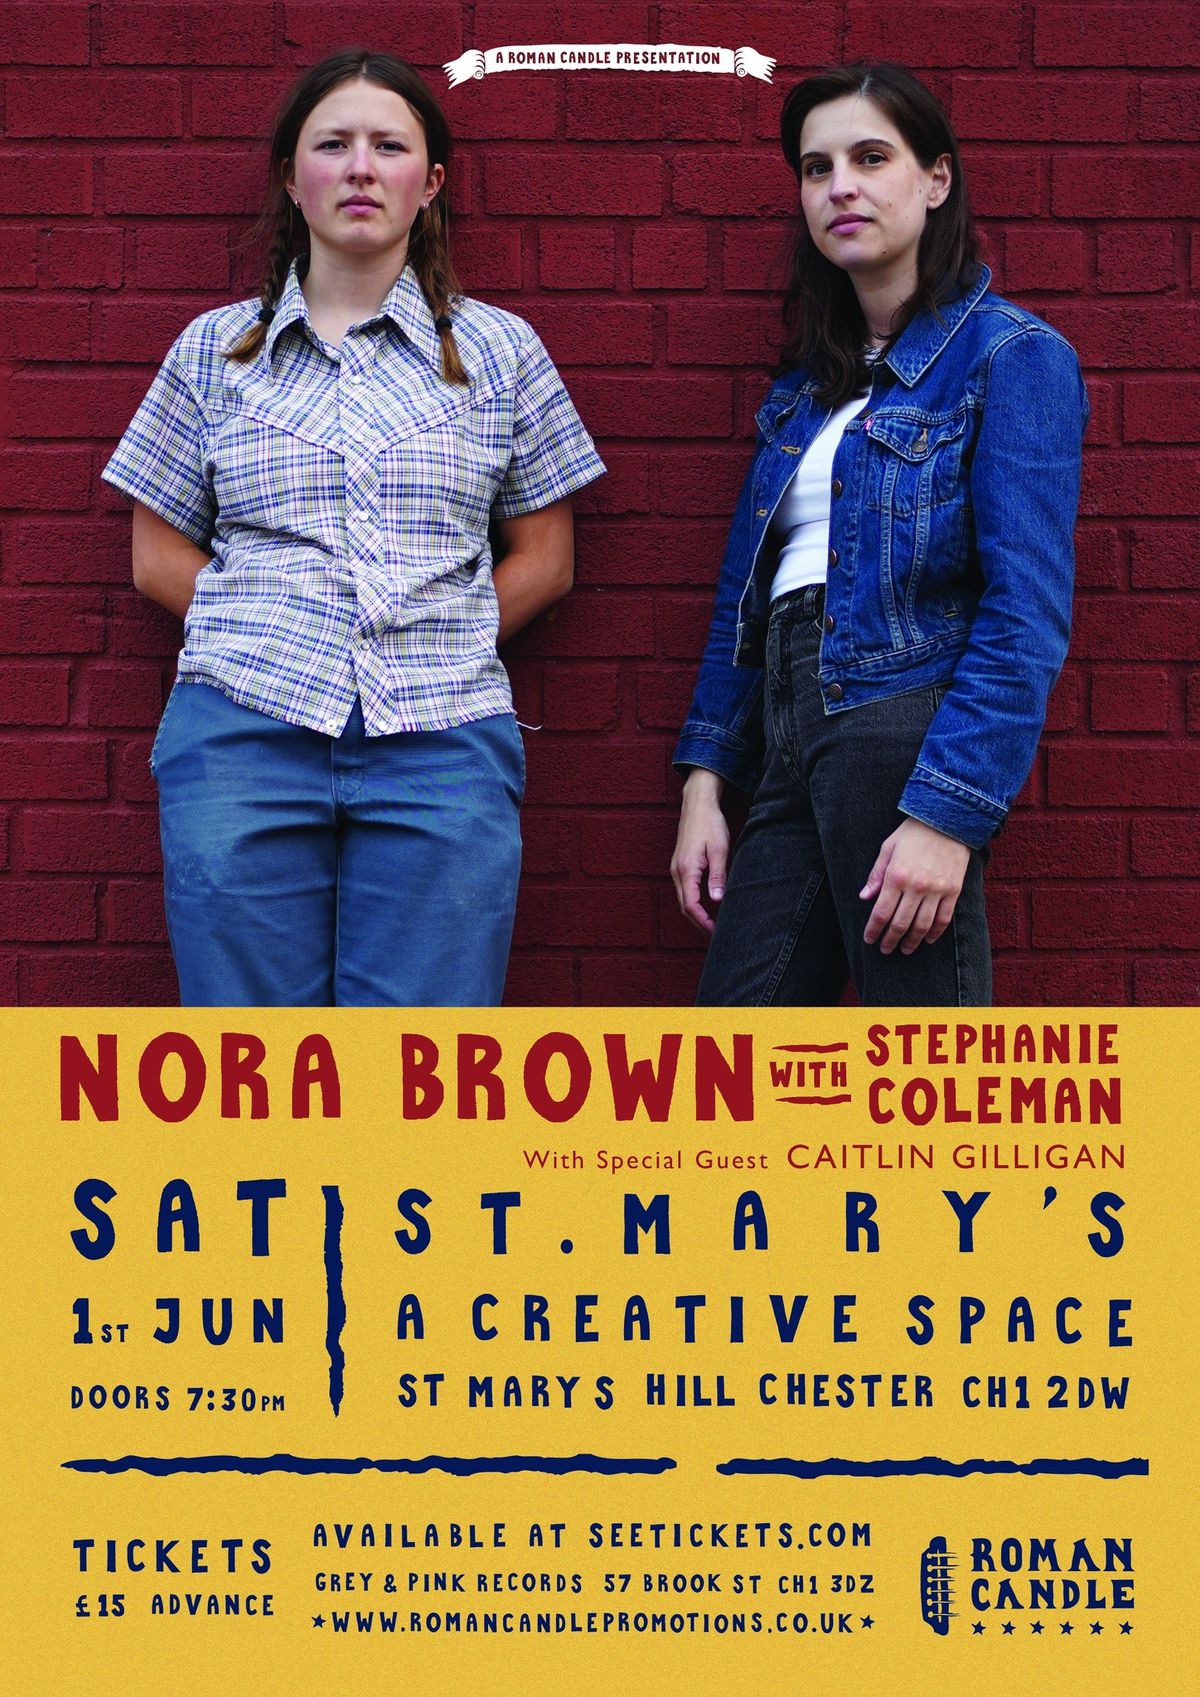 Roman Candle Presents Nora Brown with Stephanie Coleman